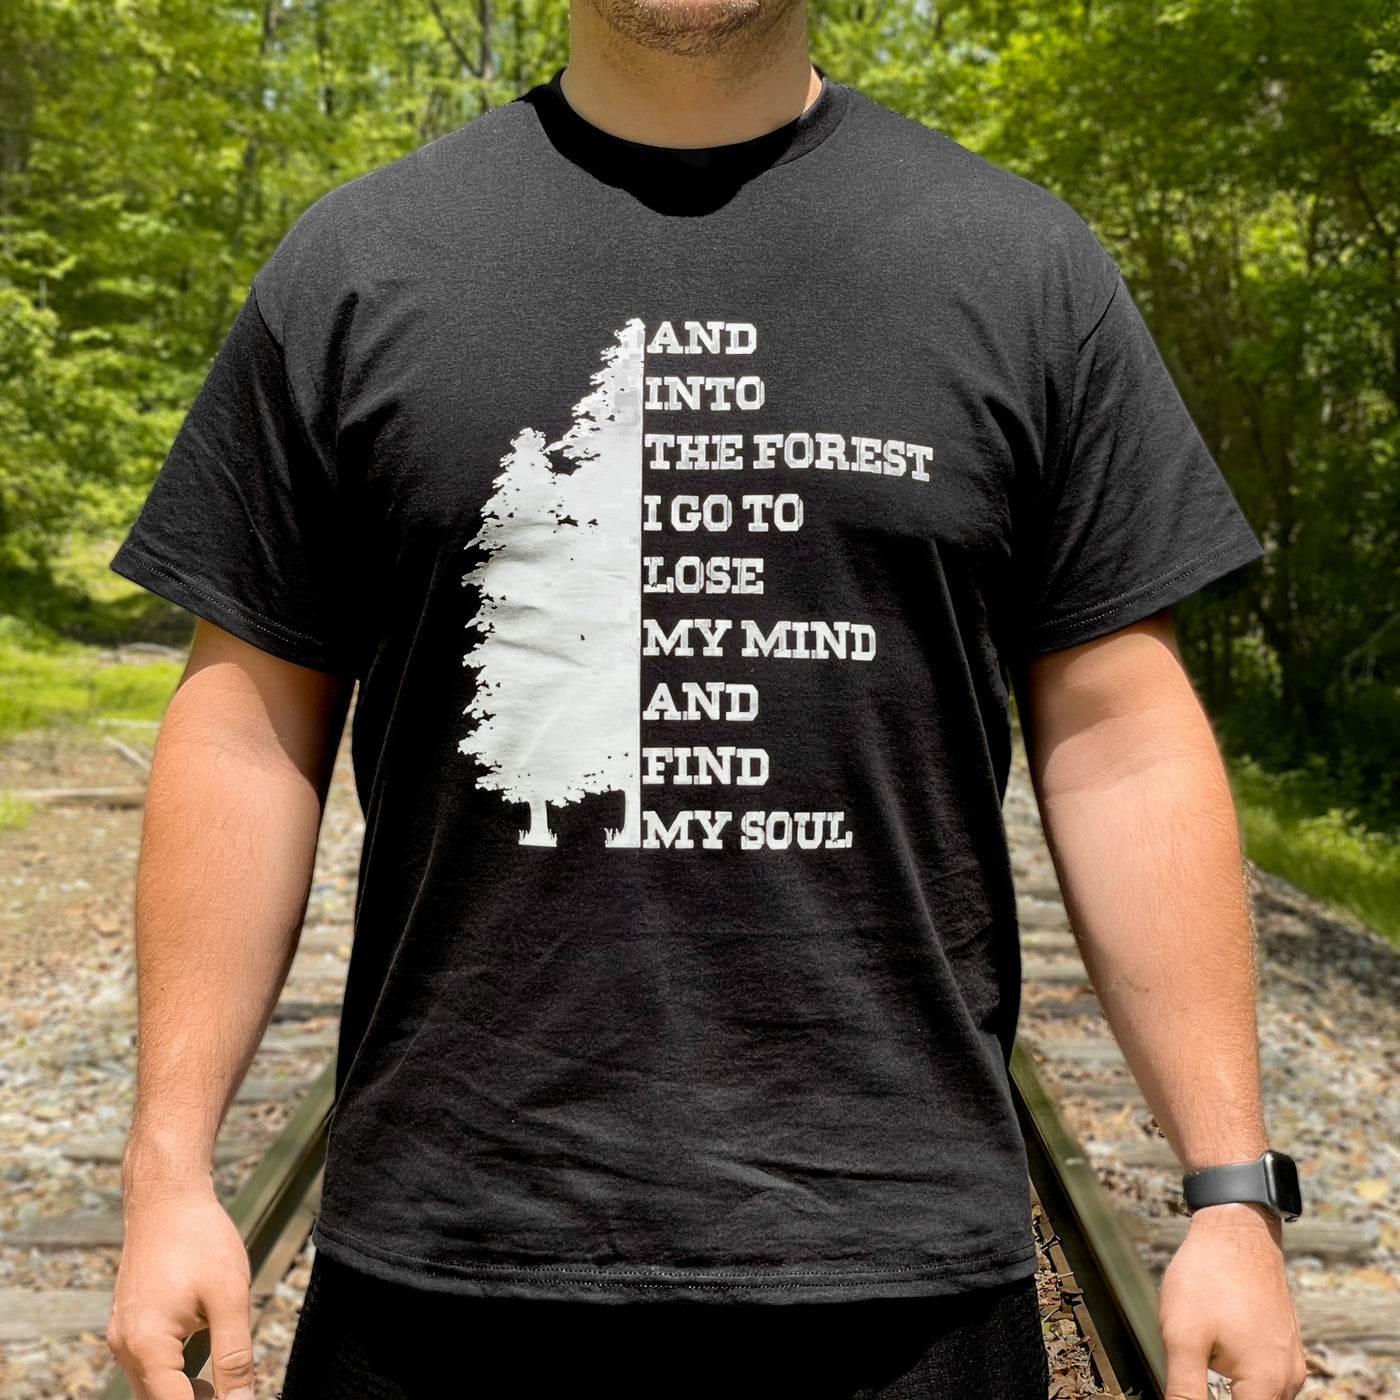 Into the Forest Pine T-Shirt